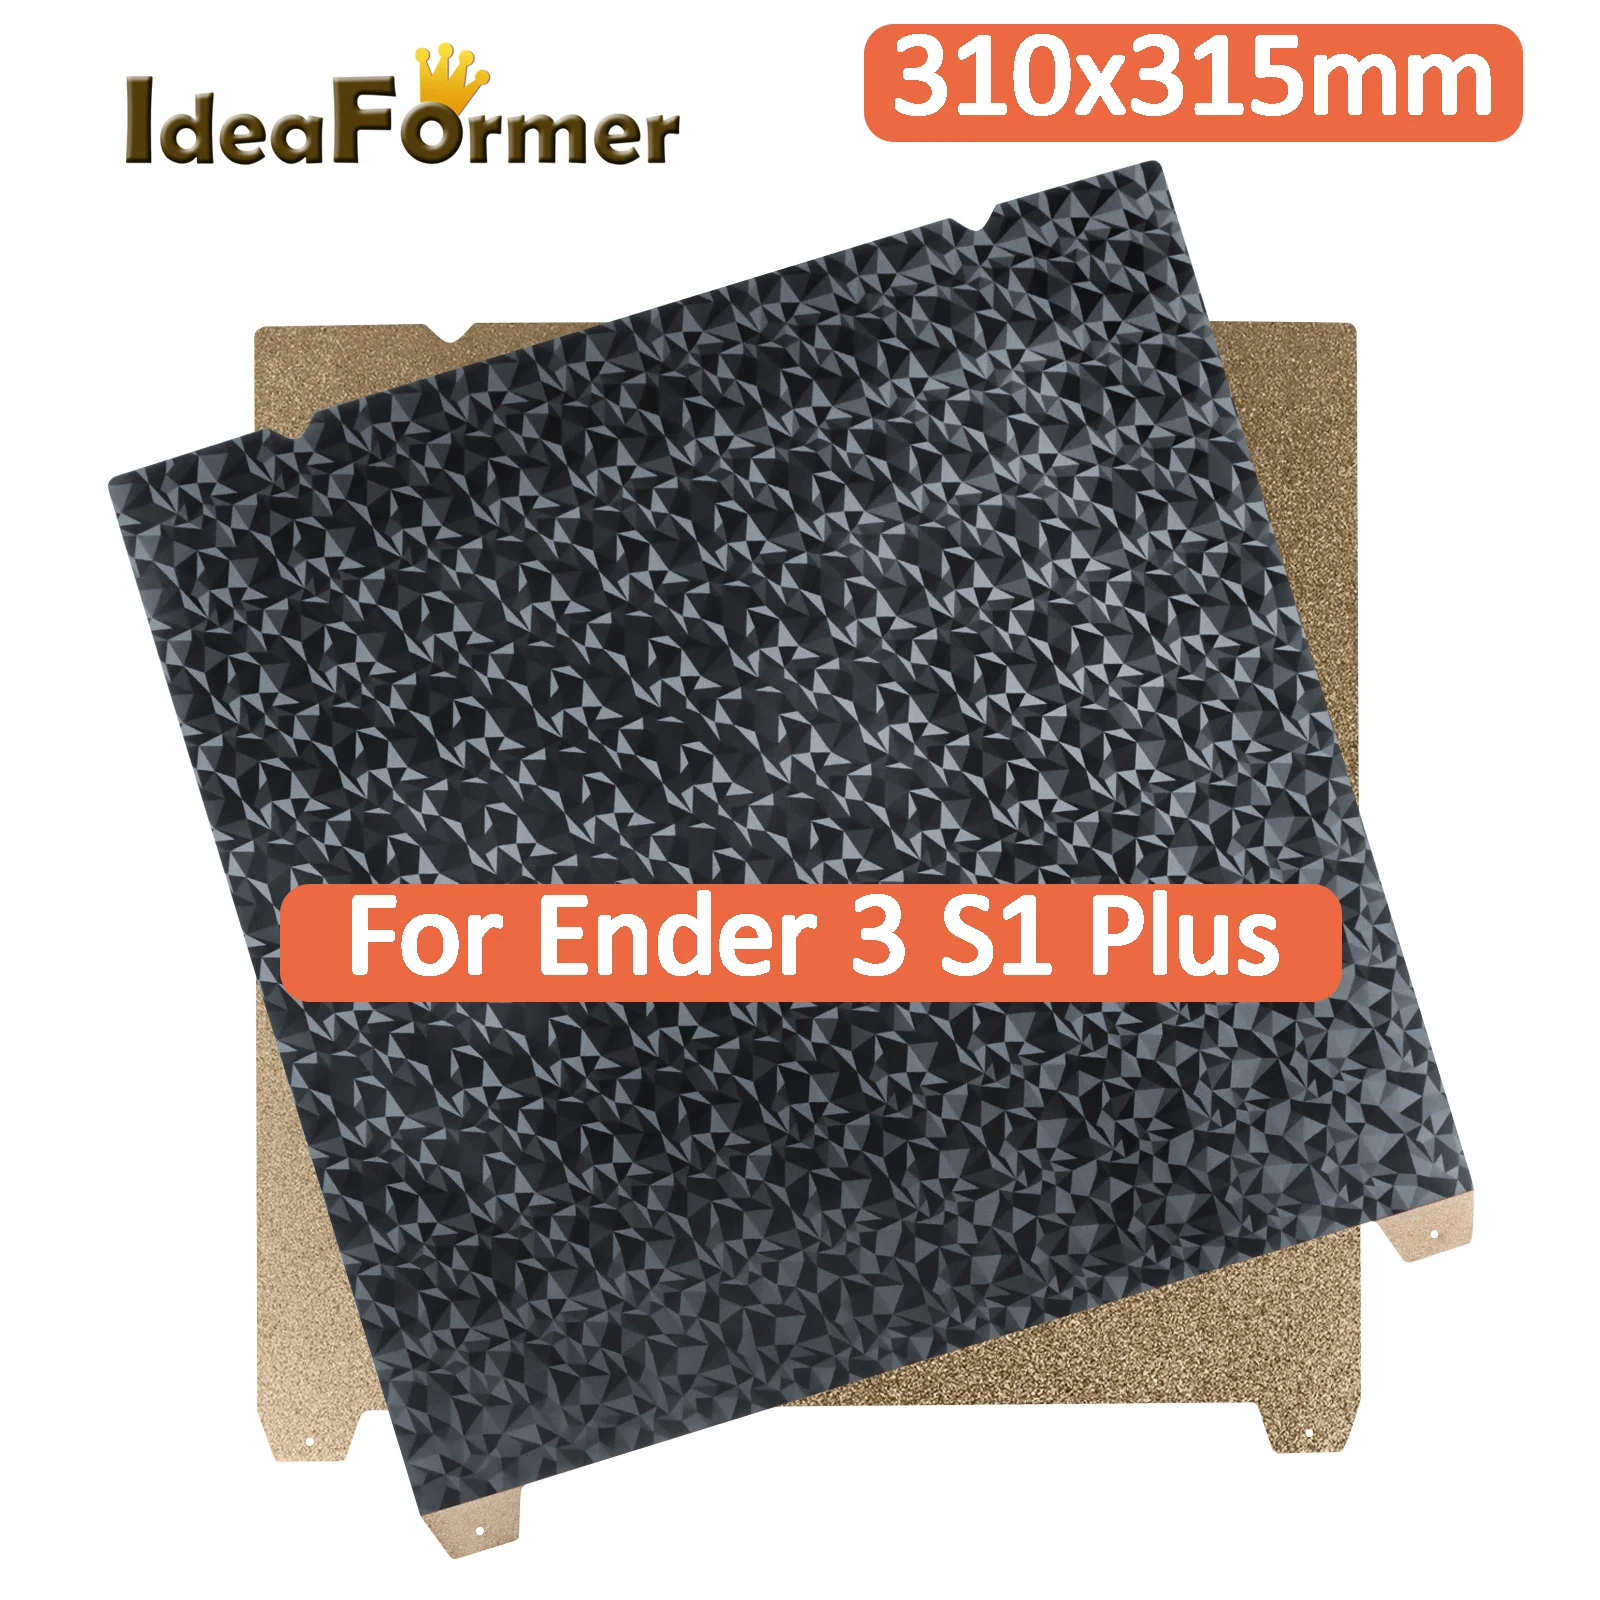 For Ender 3 S1 Plus PEI Sheet 310x315mm Double Sided Printing PEO PEI Sheet for Sovol sv06 Plus CR-10 Smart Pro PEI Build Plate